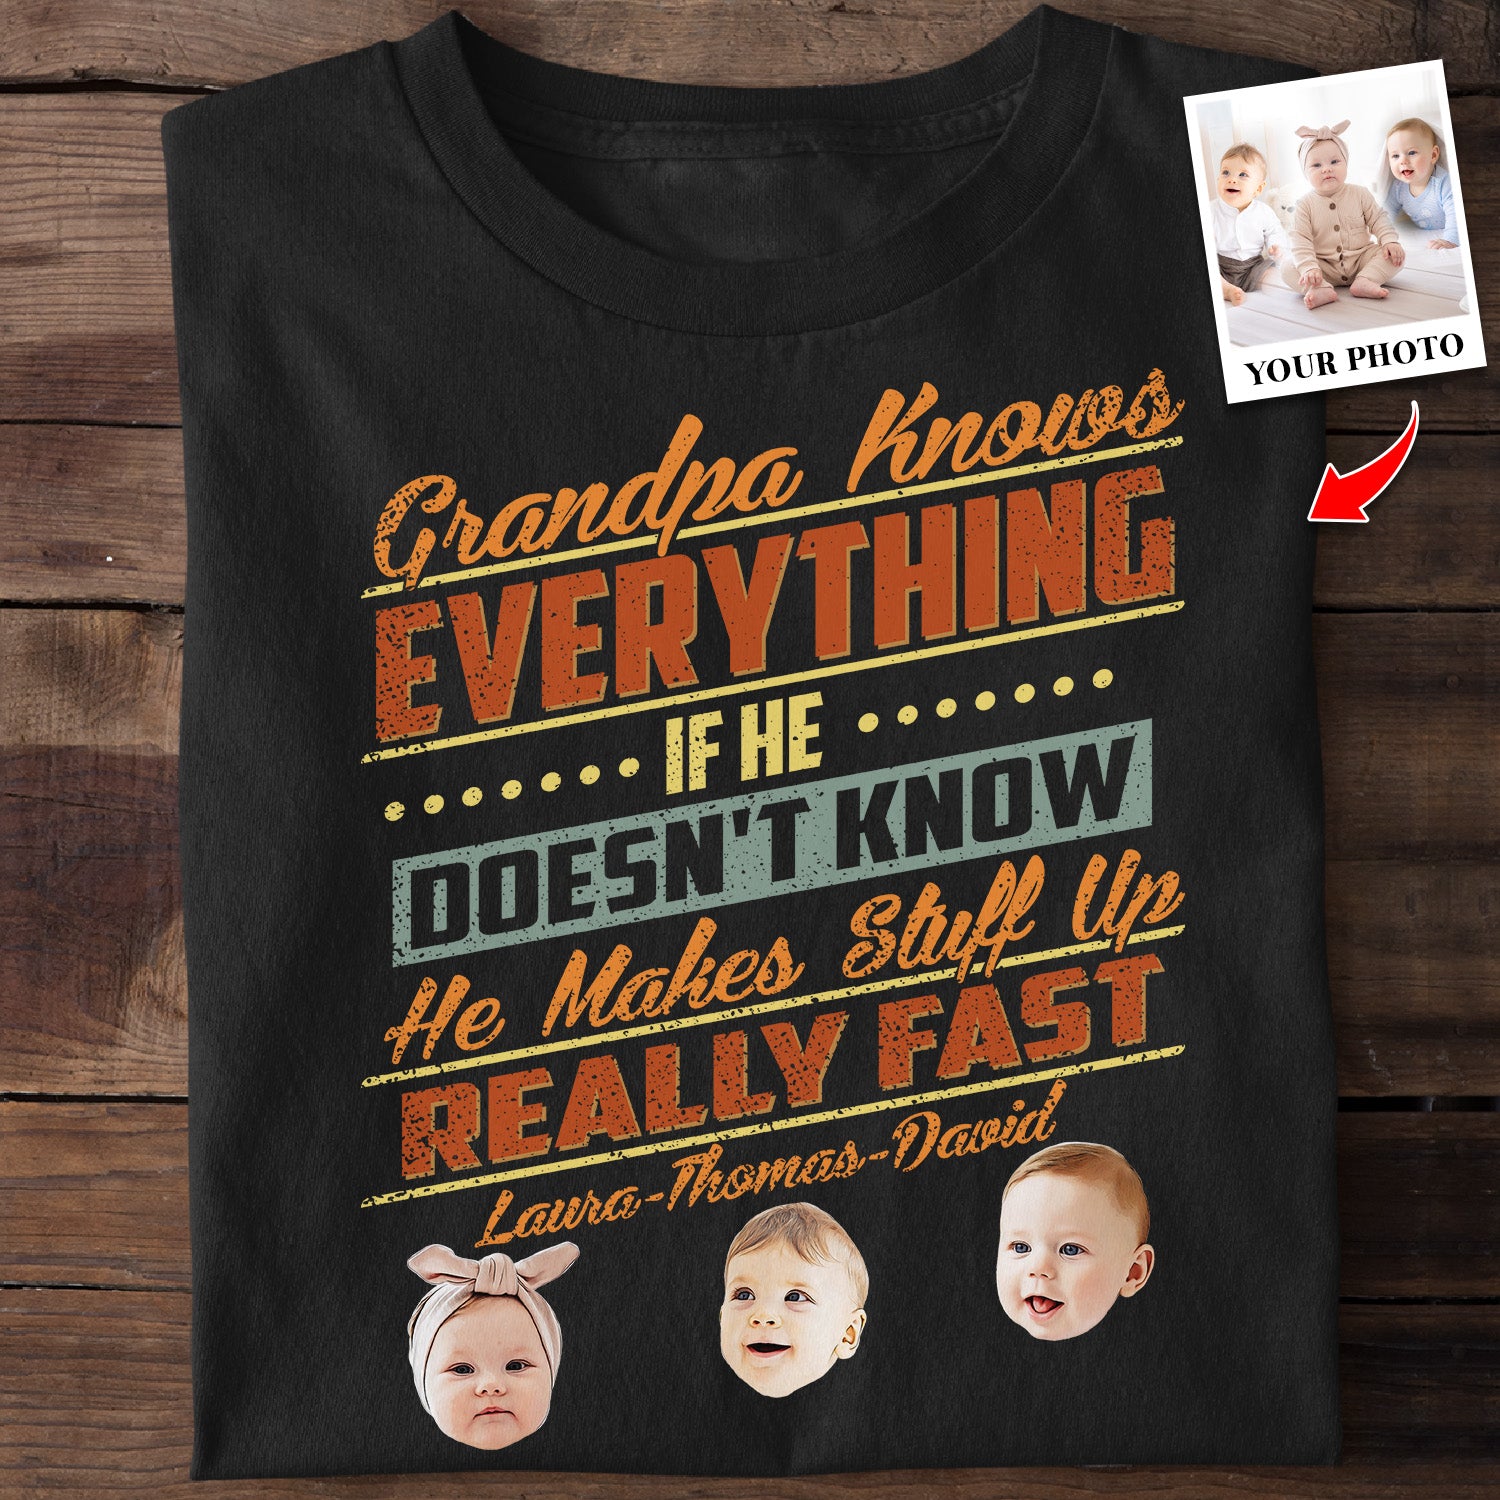 Custom Portrait From Photo, Grandpa Shirt With Grandkid's Name, Grandpa Knows Everything If He Doesn't Know He Makes Stuff Up Really Fast, Personalized Name And Text, Tshirt